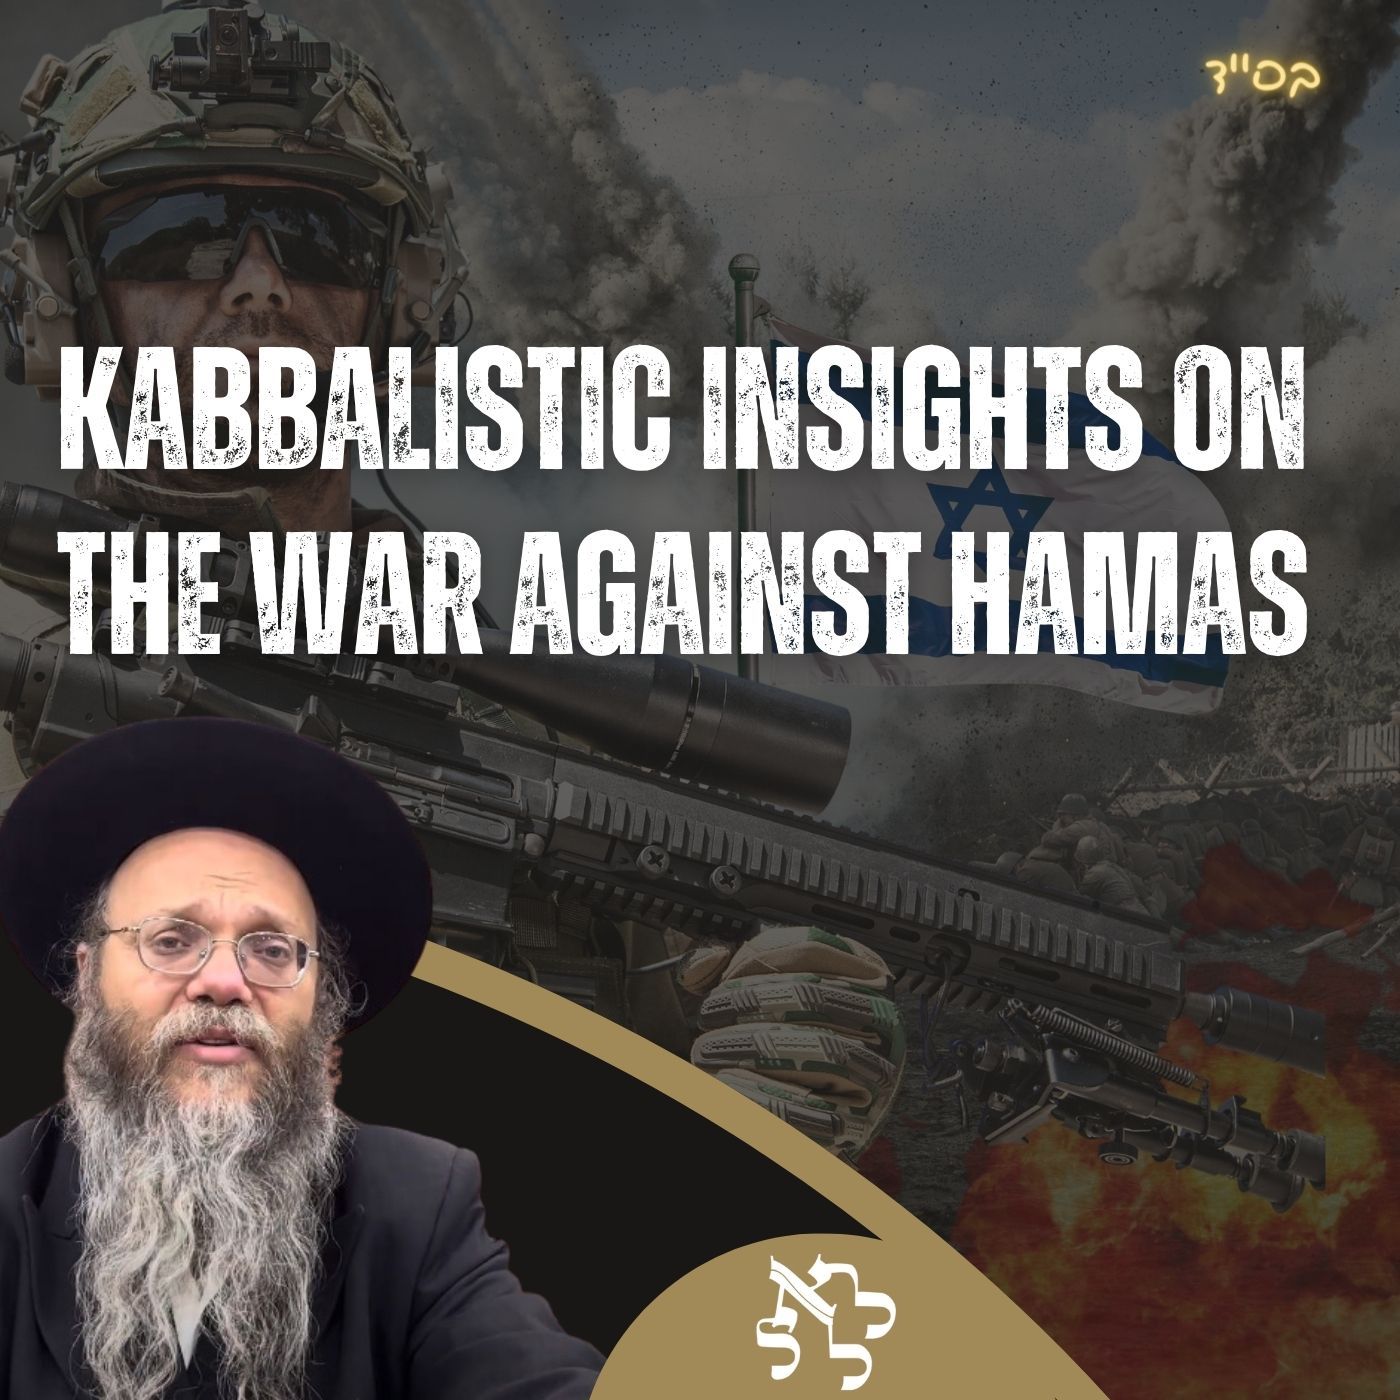 Kabbalistic Insights on the War Against Hamas